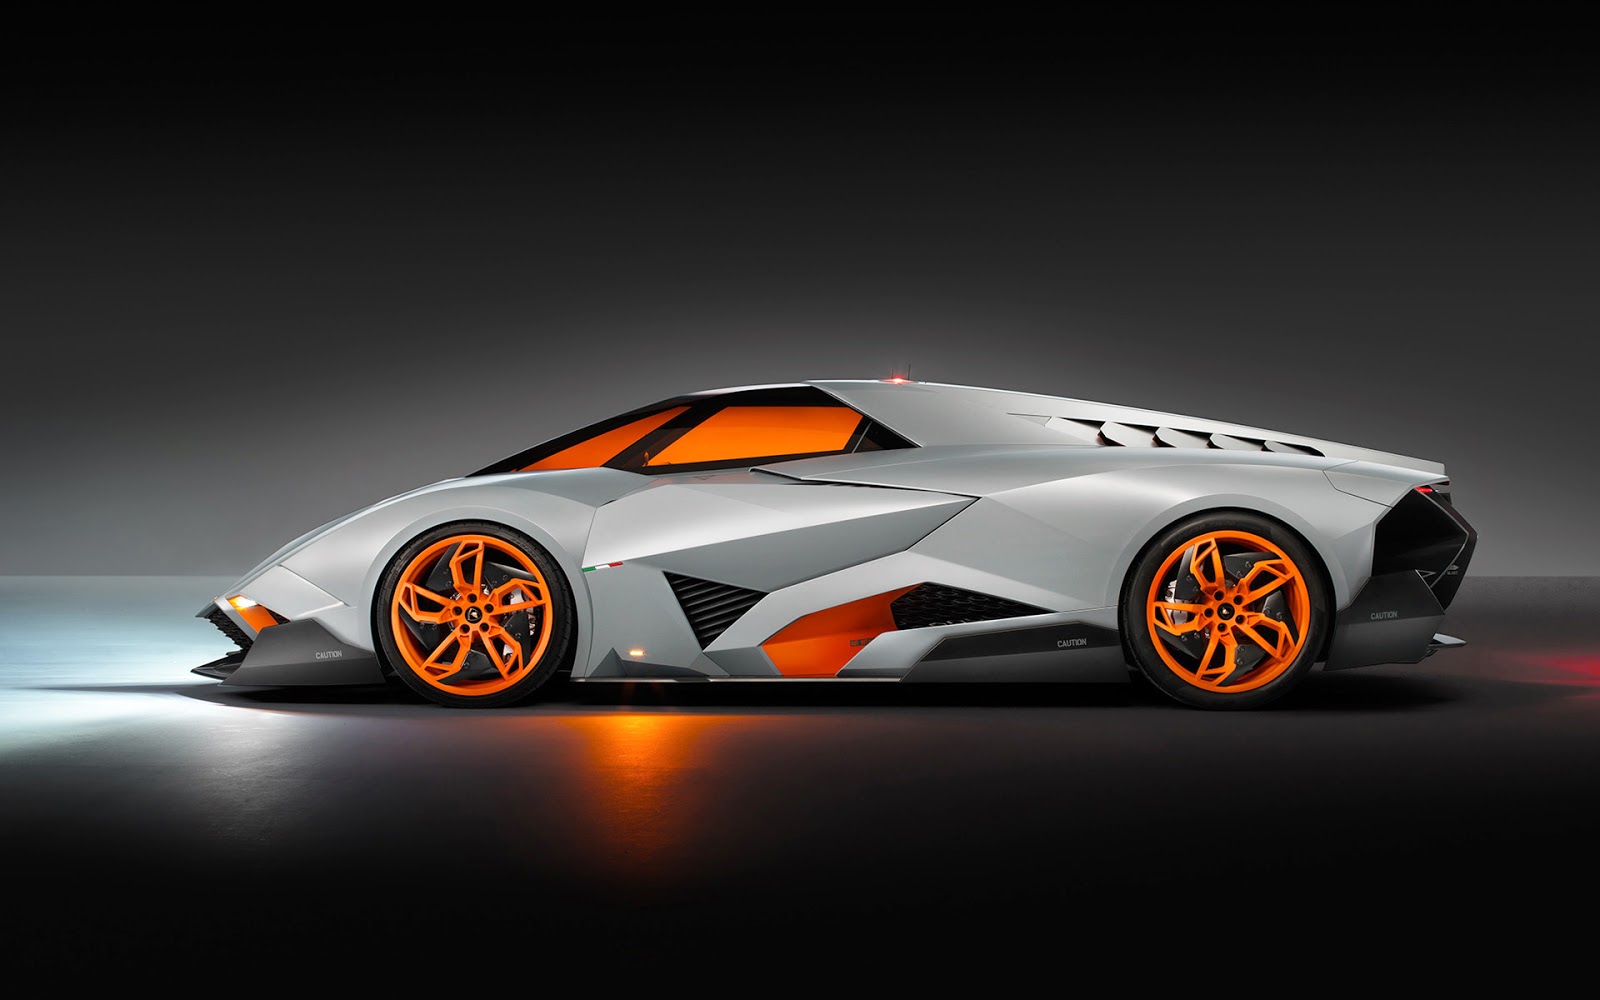  Car Wallpapers 2014 Iphone car fast cool cars sports cars 1600x1000